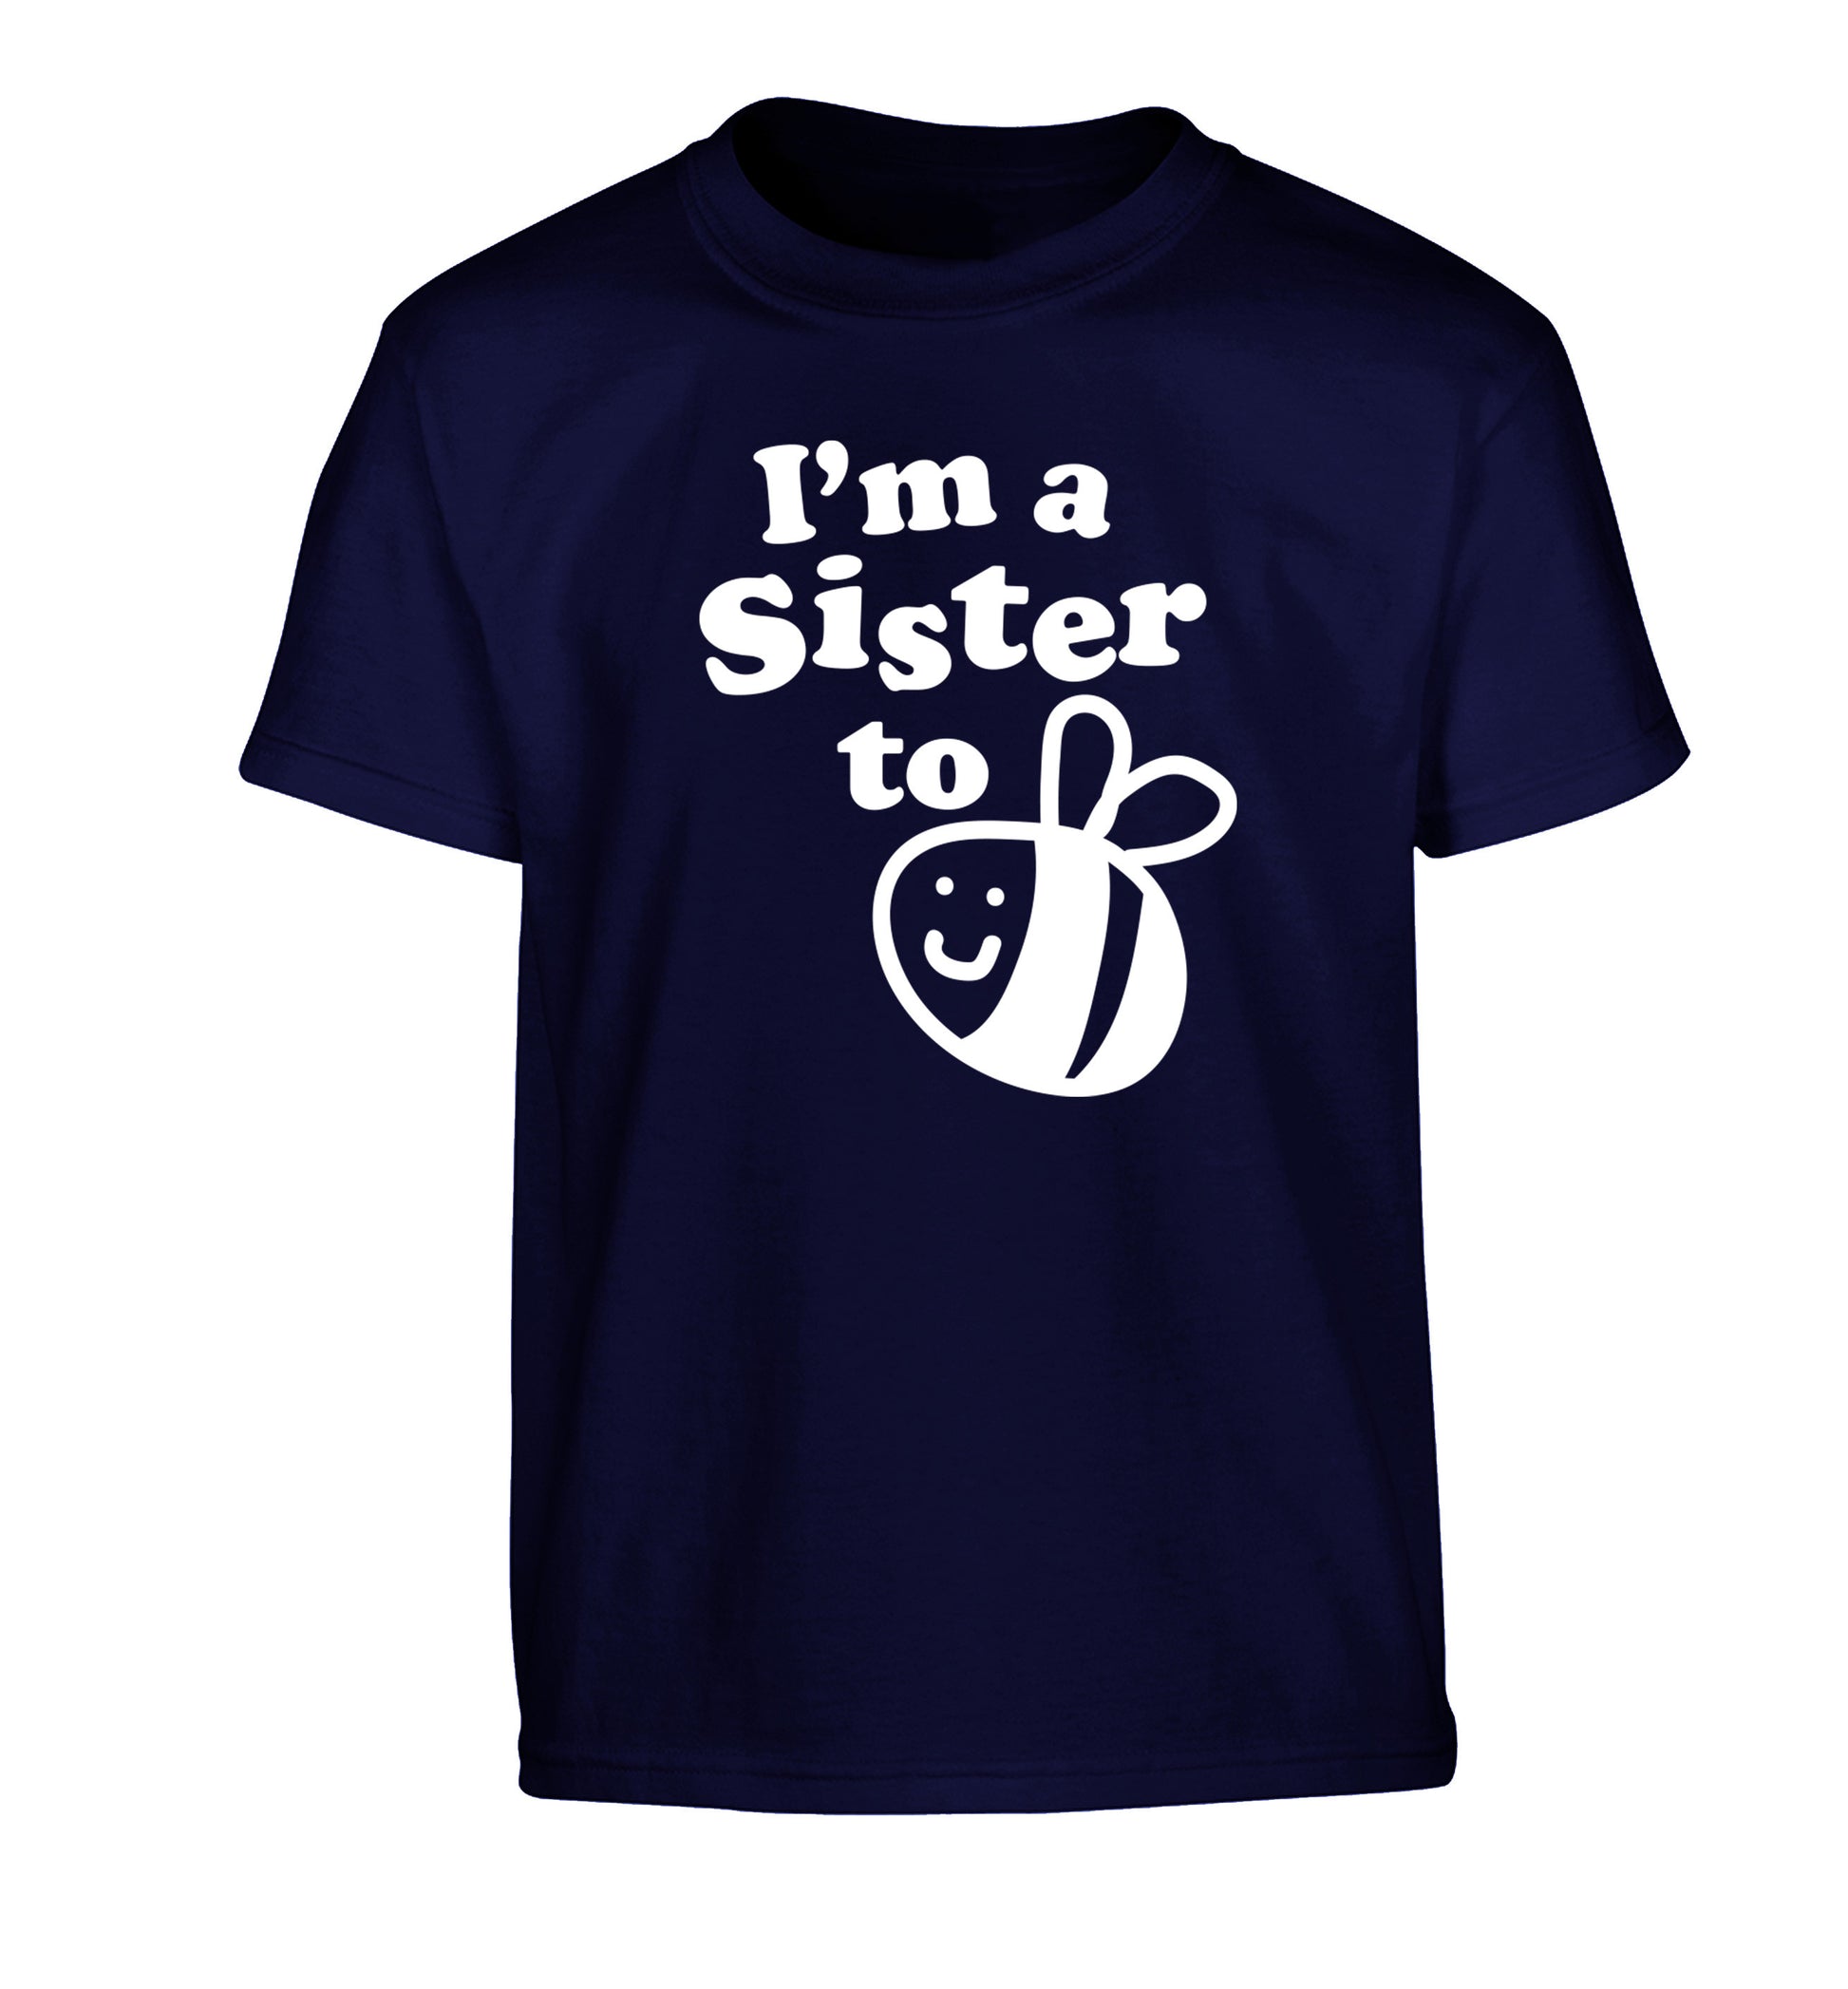 I'm a sister to be Children's navy Tshirt 12-14 Years